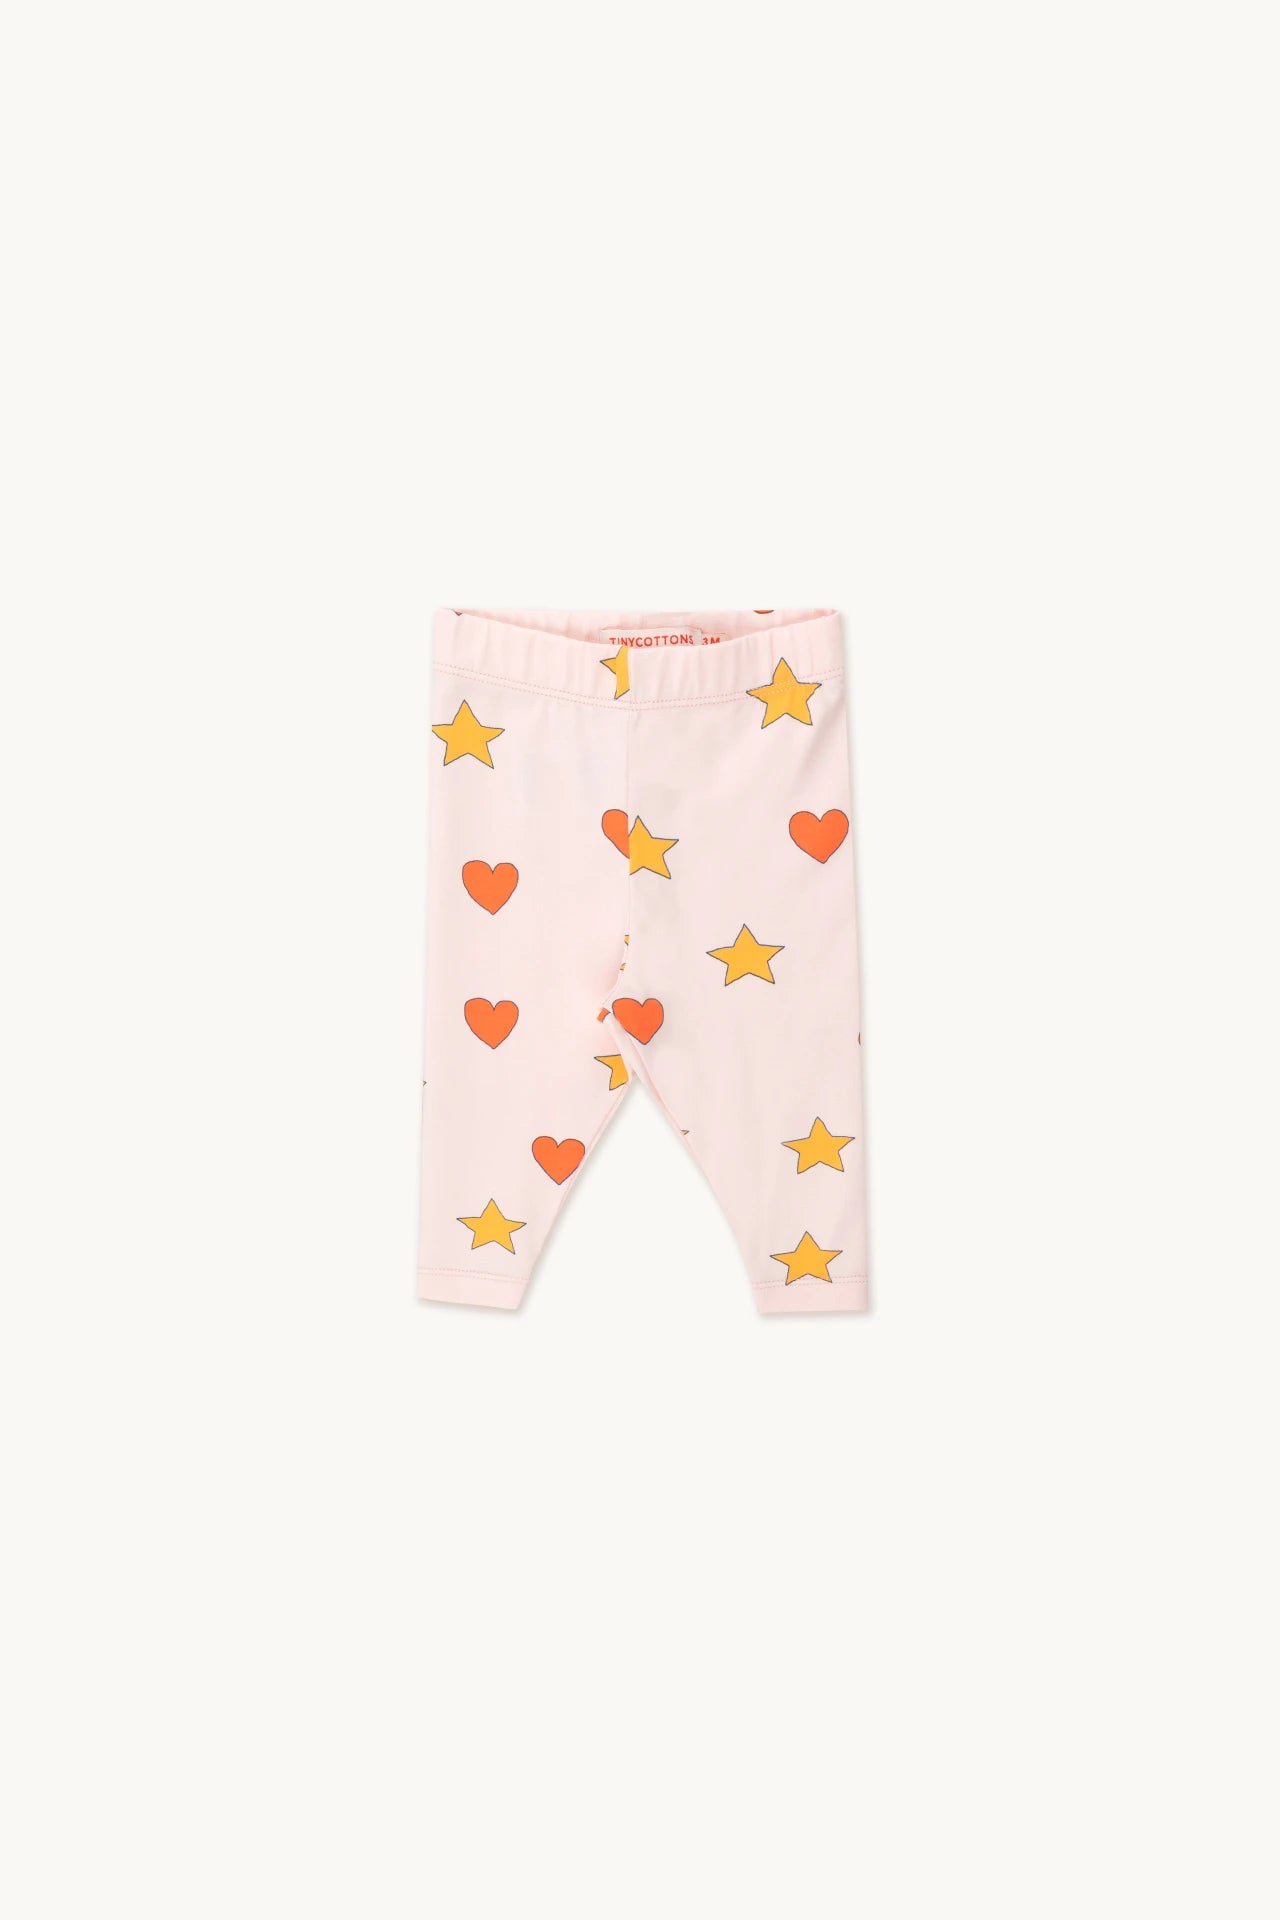 Tiny Cottons - Hearts and Stars Baby Pants